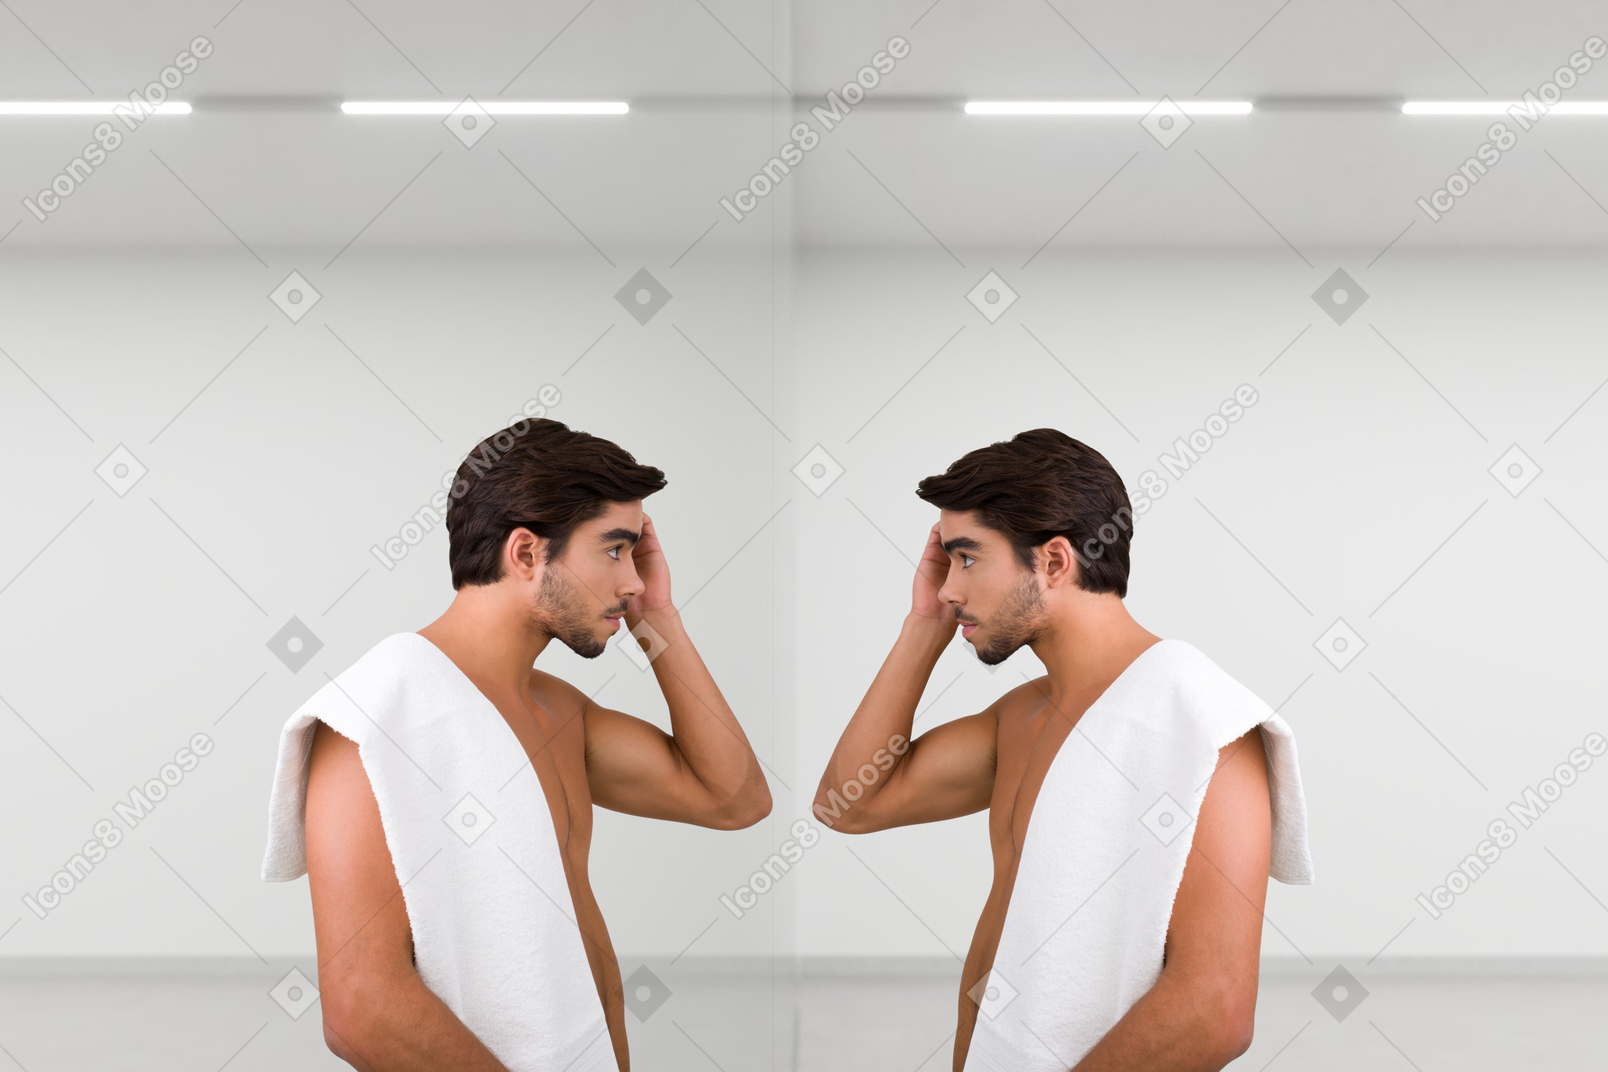 A man with a towel on his back looking at himself in the mirror